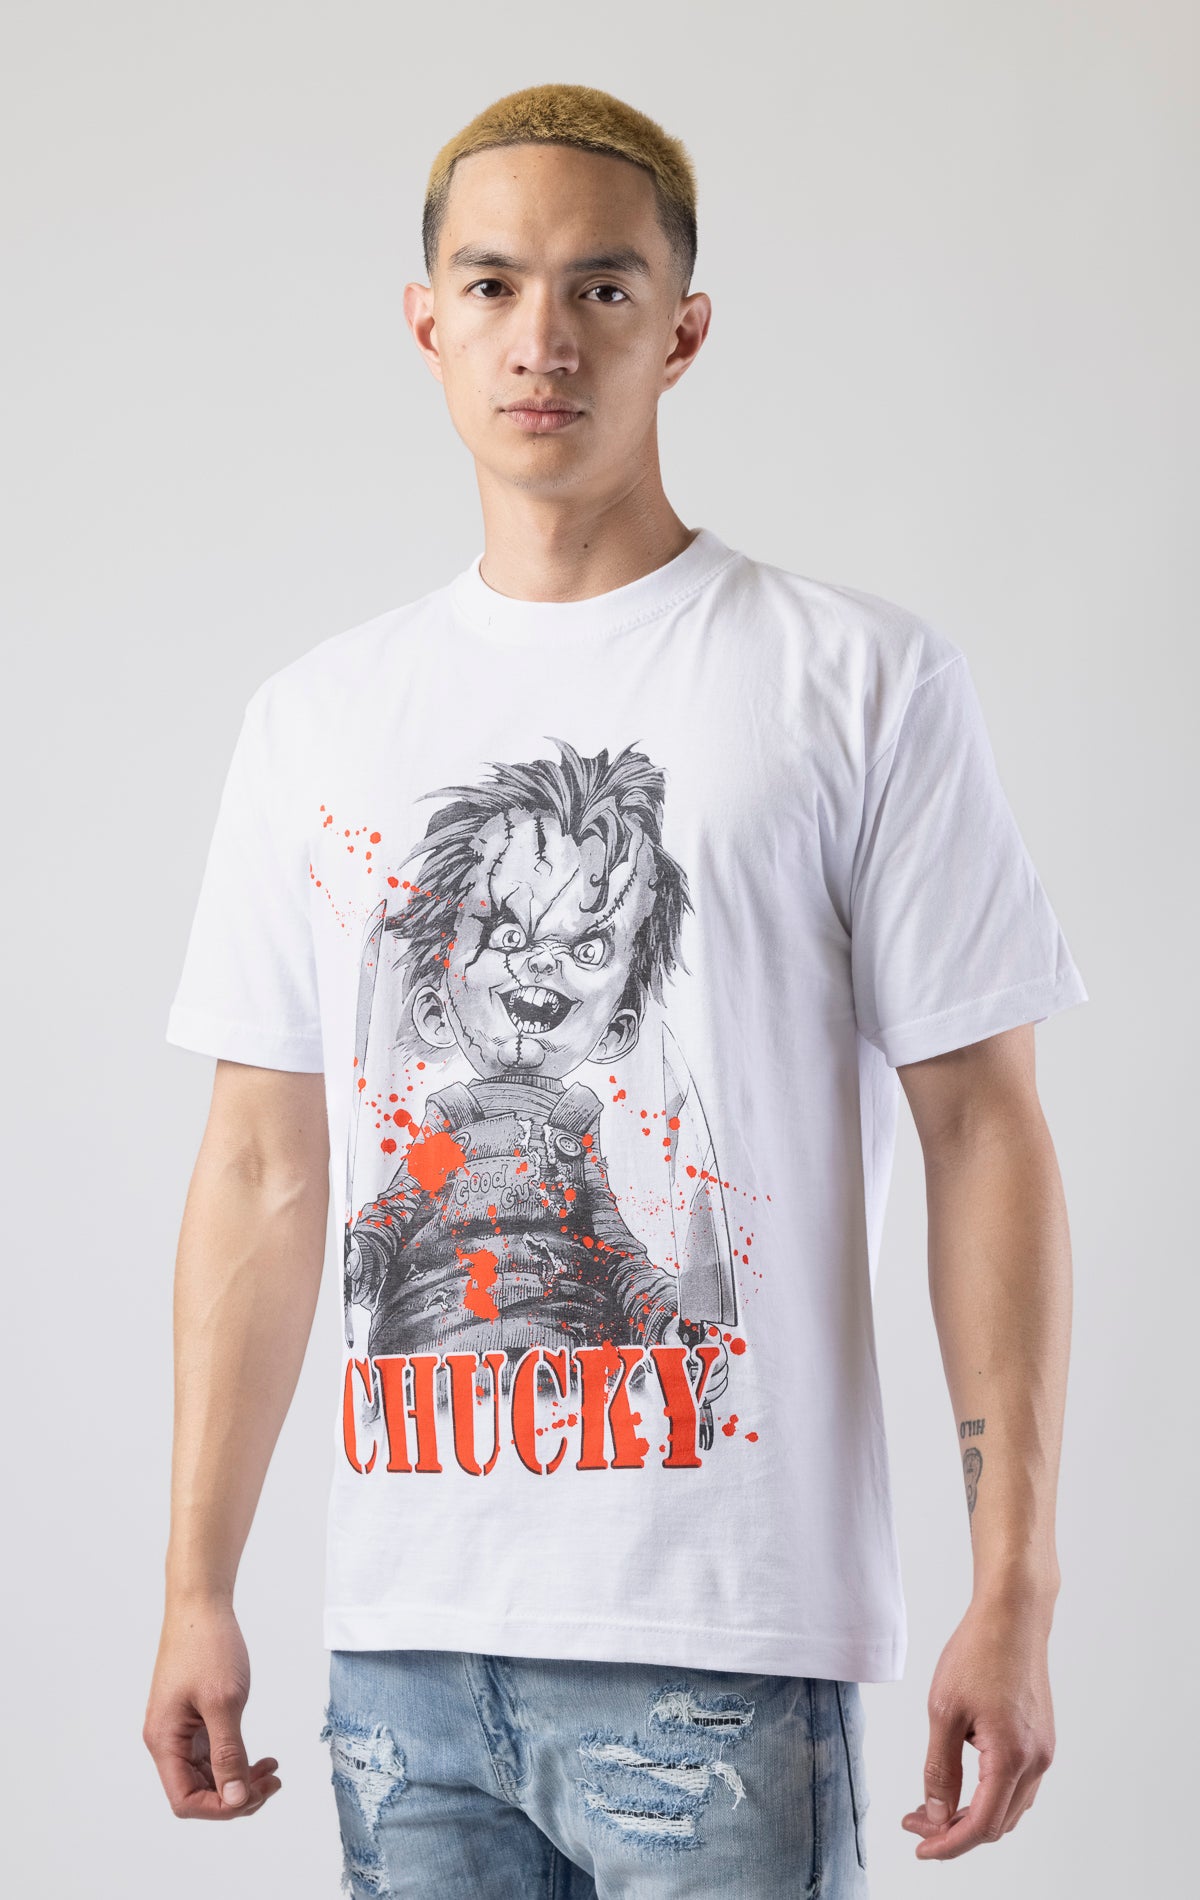 Oversized T-shirt with ribbed crew neck and a chucky printed design on the front.